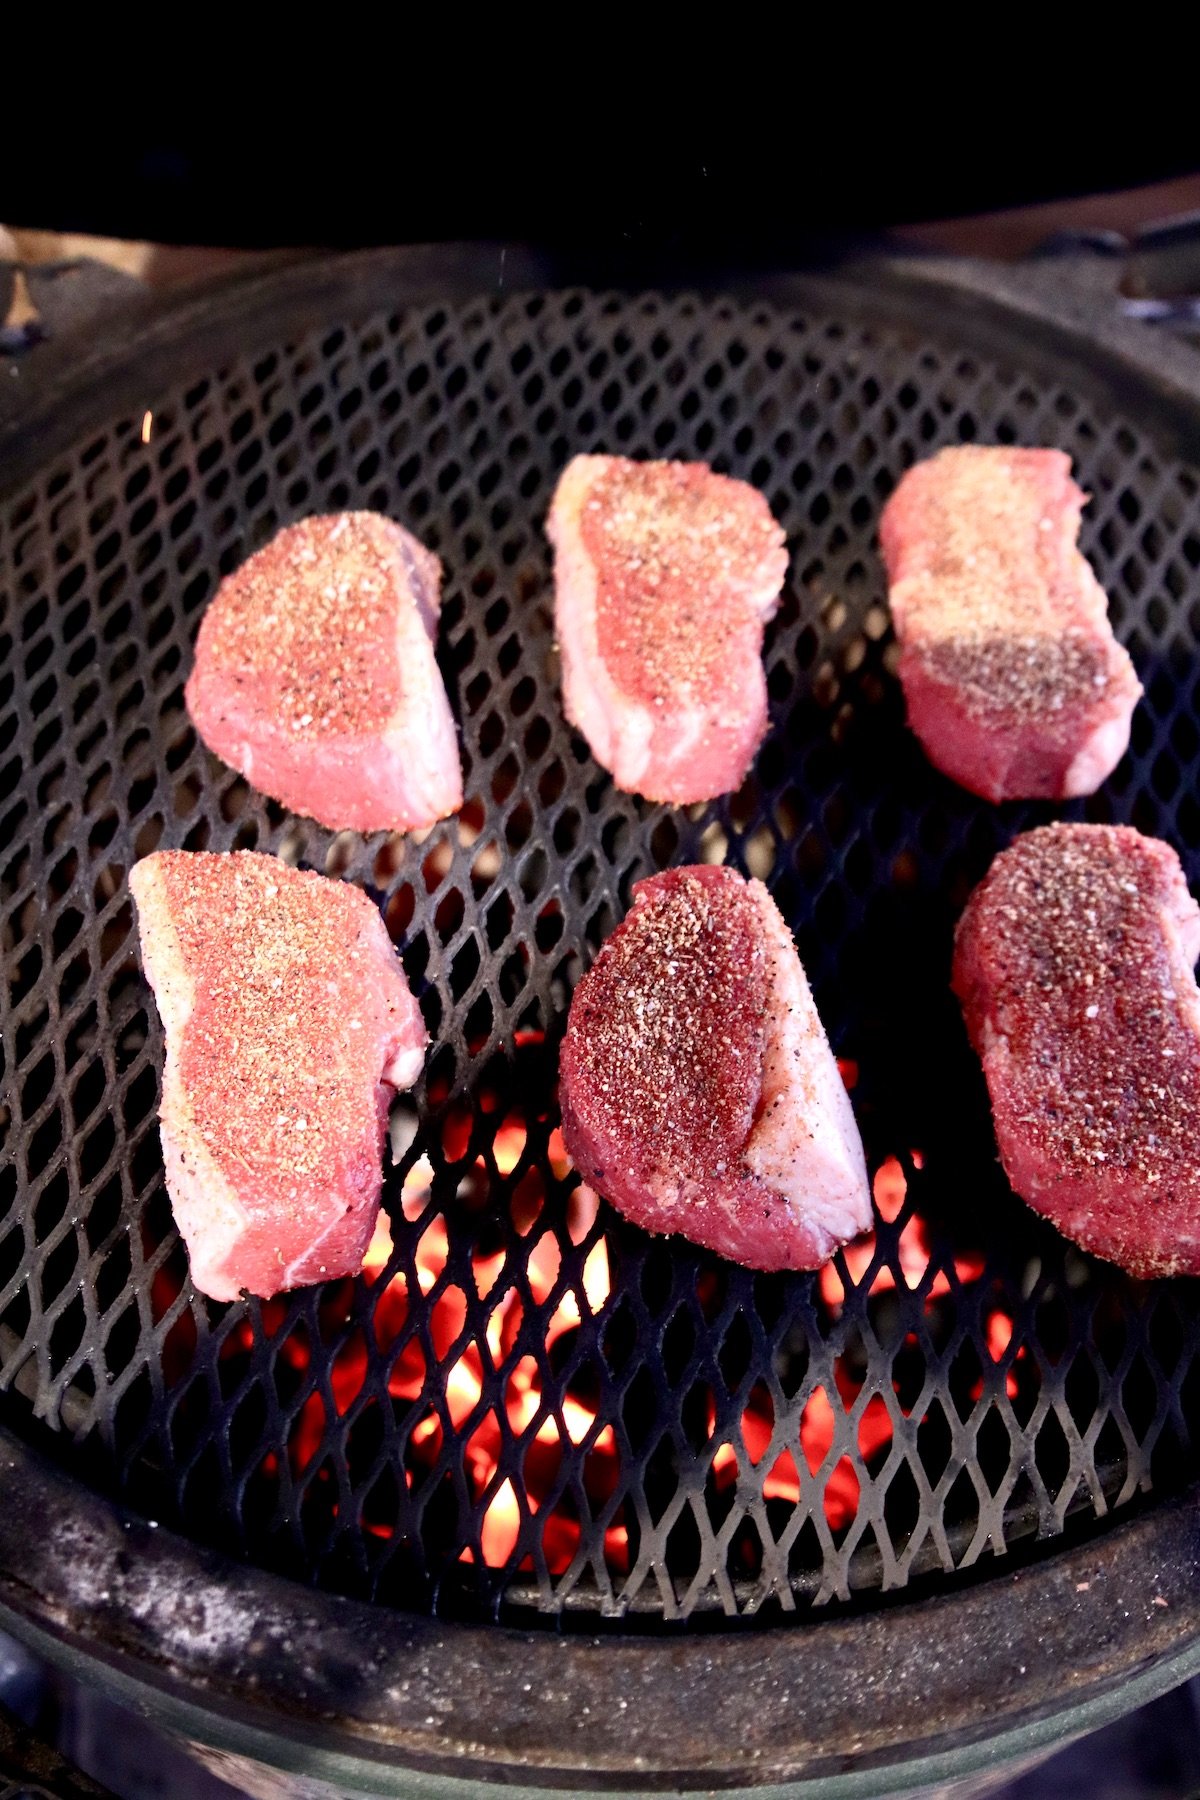 Grilling tri-tips